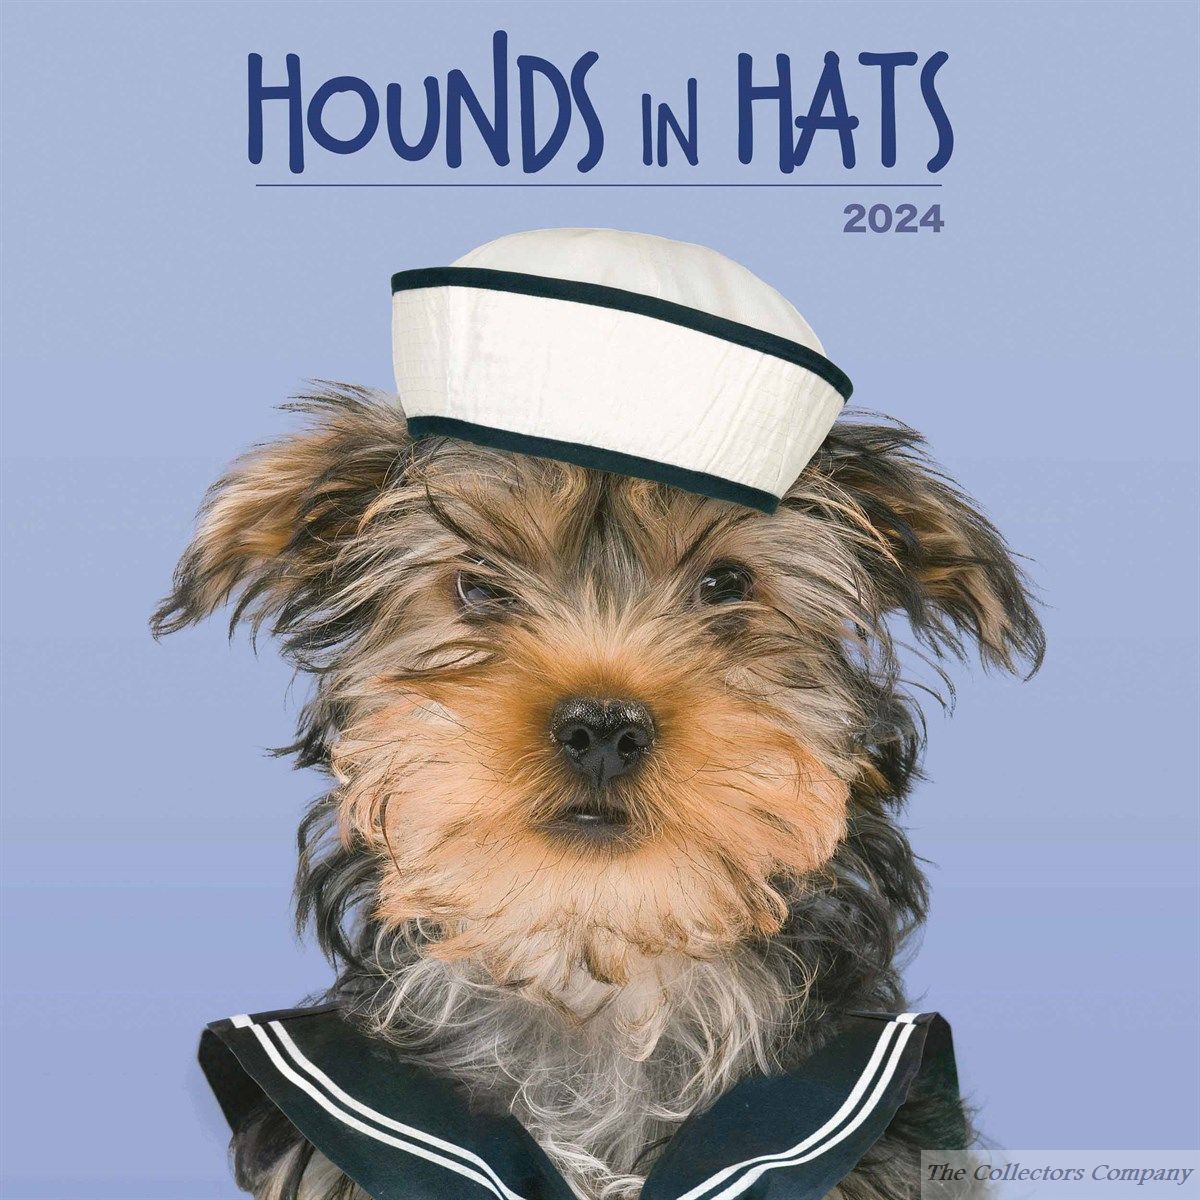 hounds-in-hats-wall-calendar-2024-by-maverick-publishing-240838